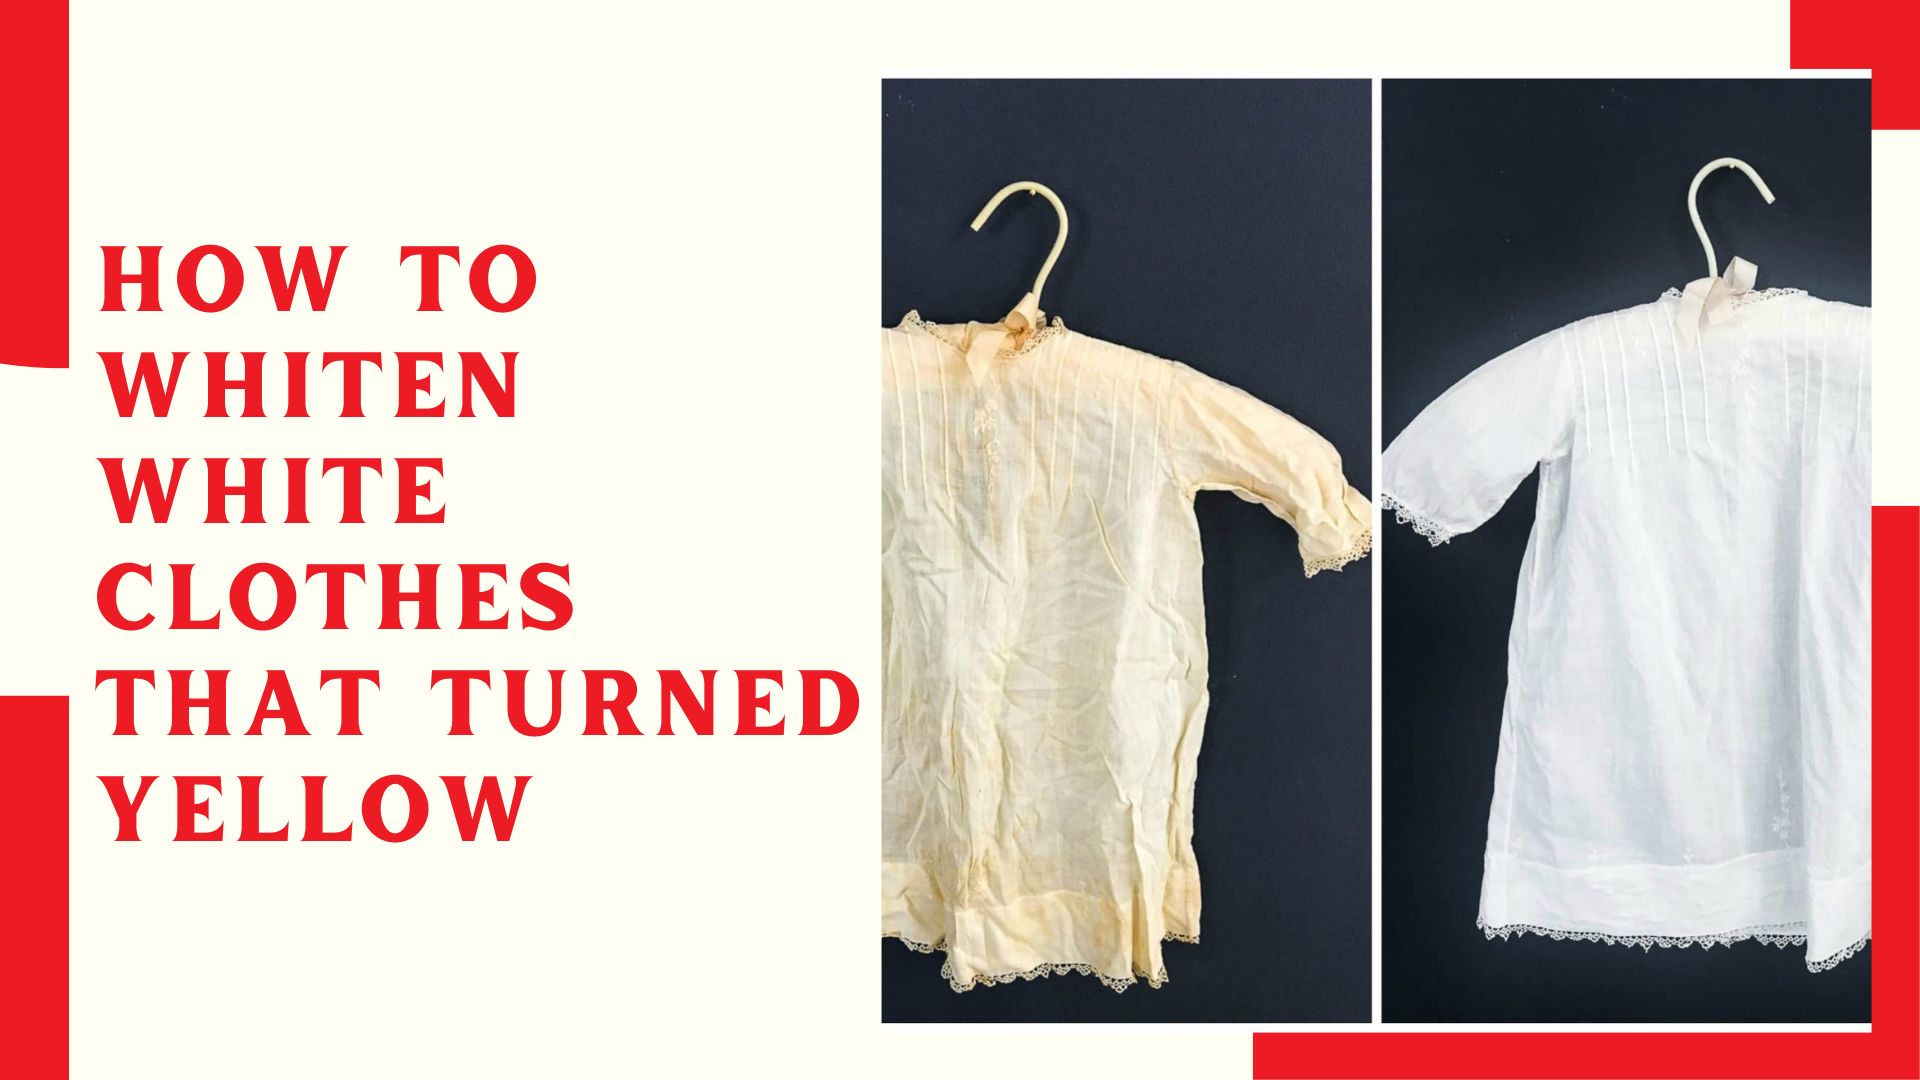 How To Whiten White Clothes That Turned Yellow